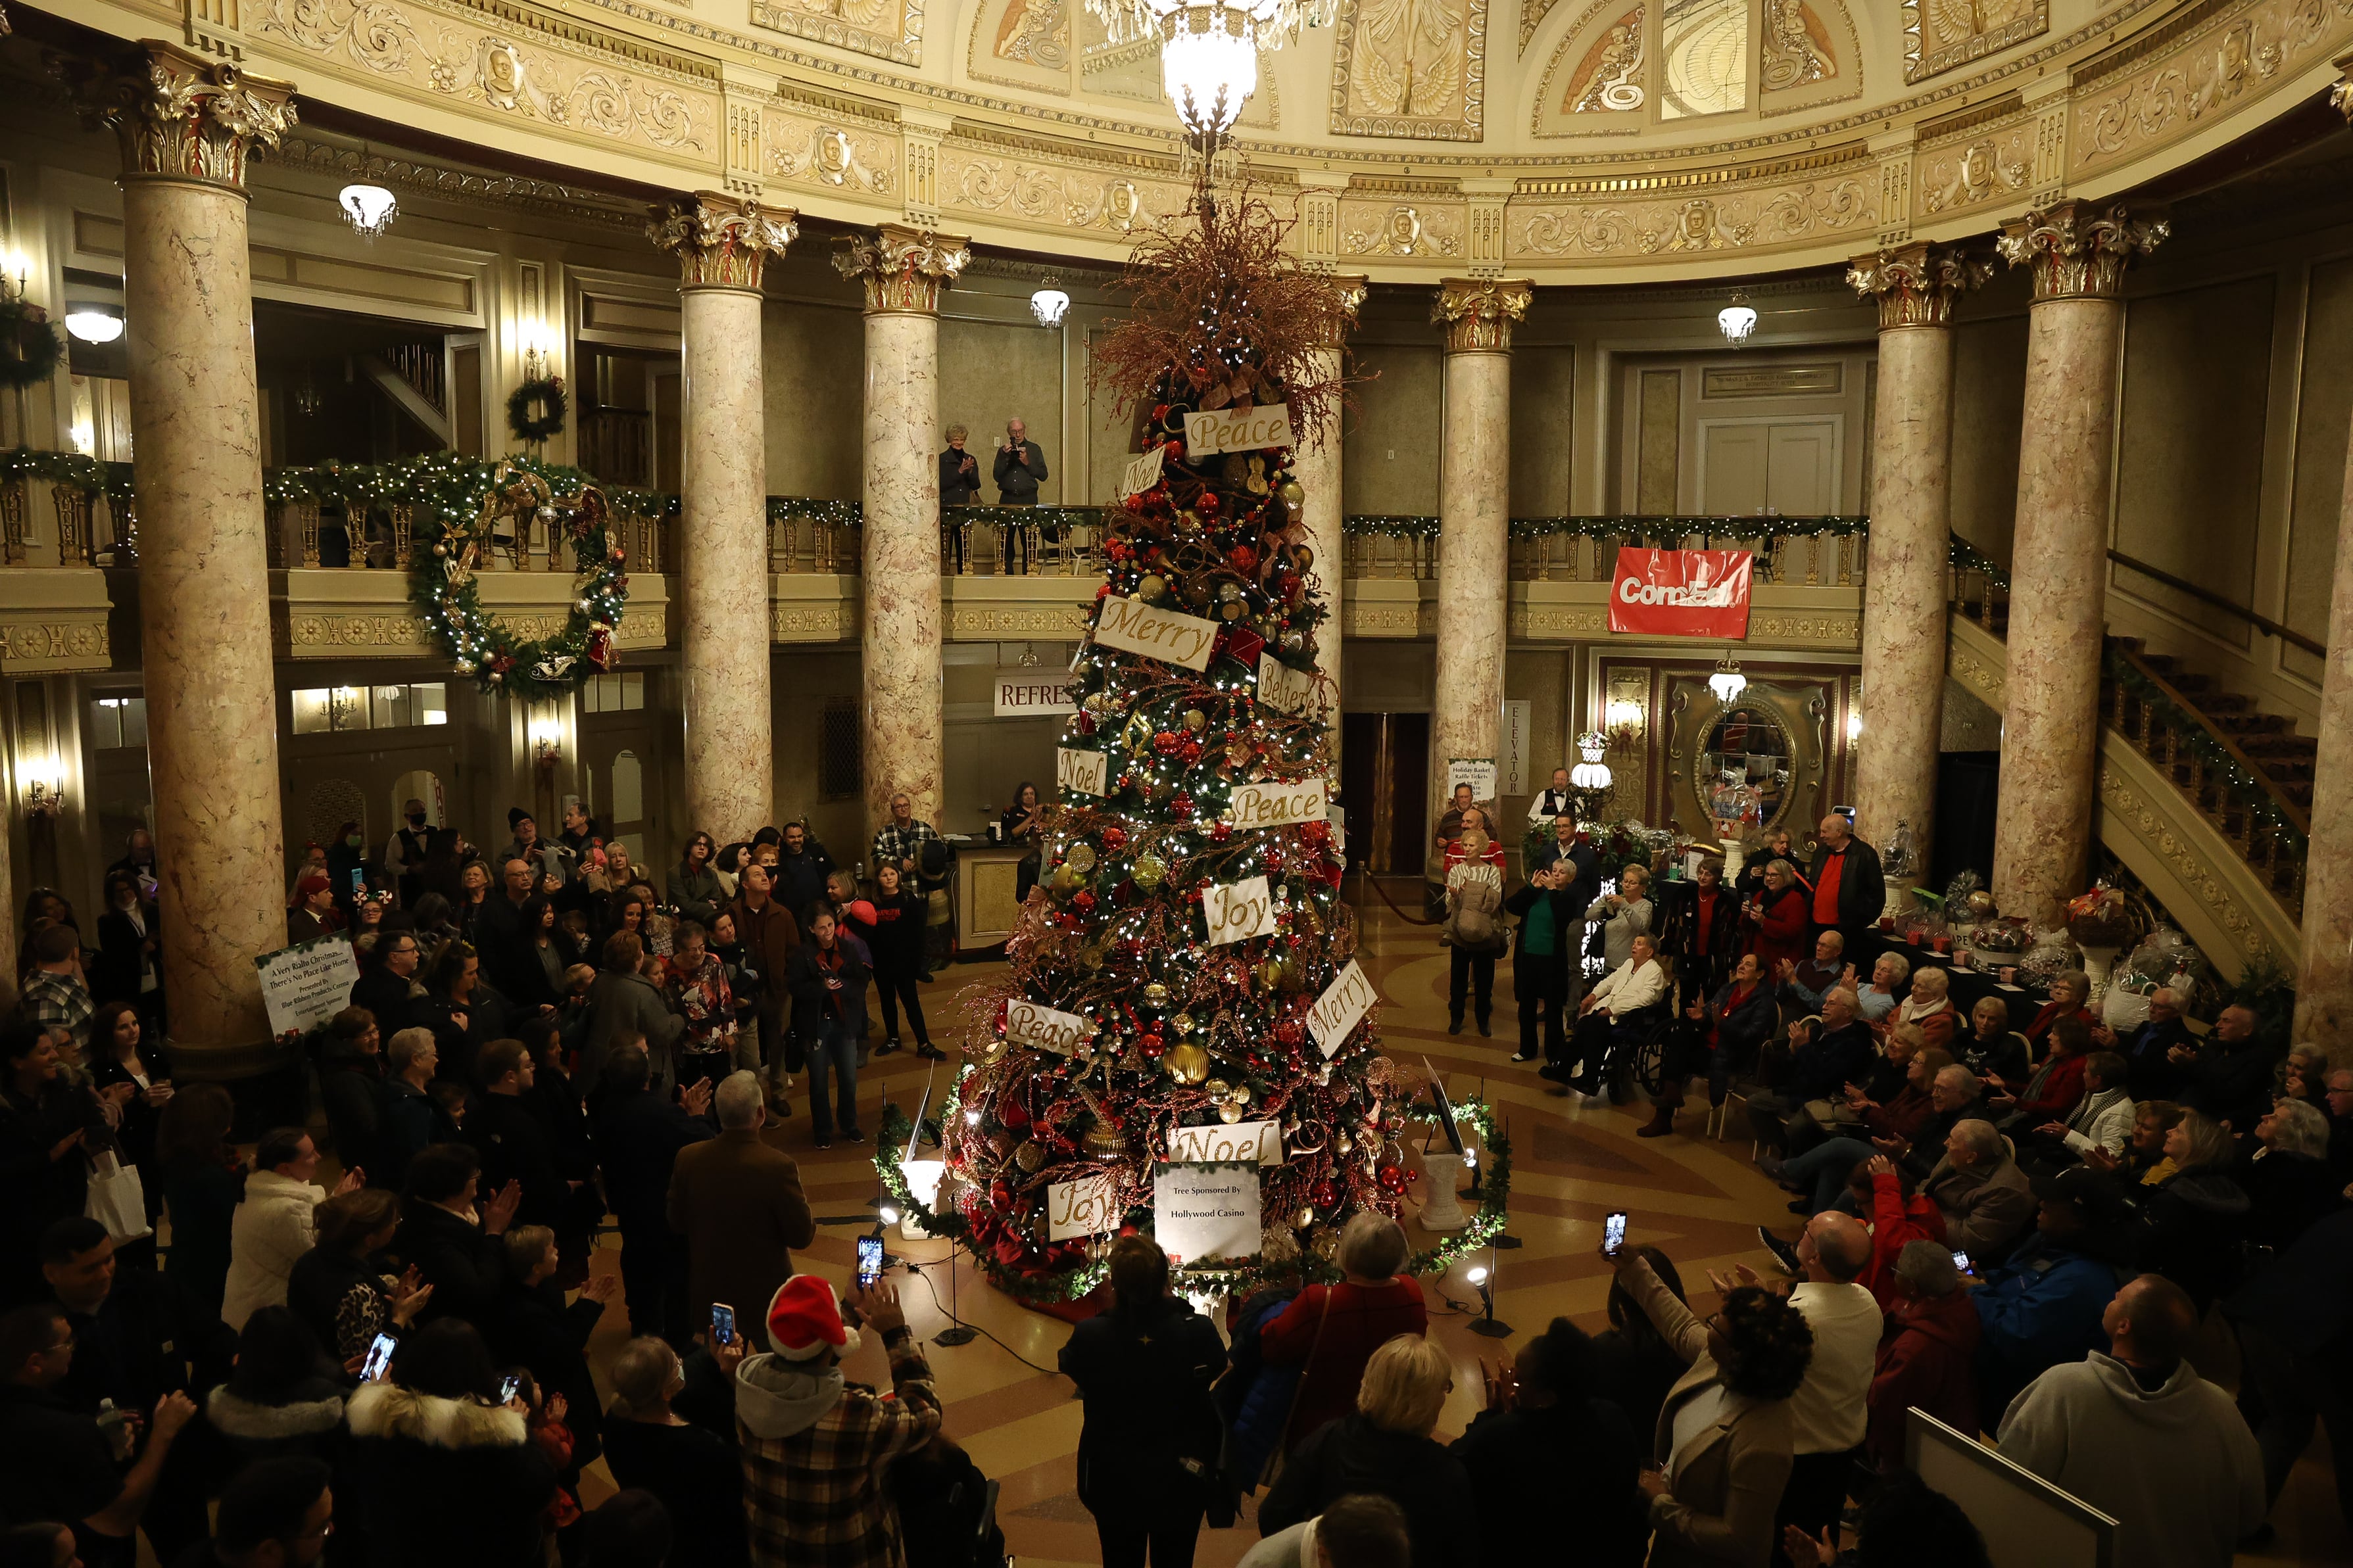 Joliet’s Rialto Theatre welcomes holiday season with music, tree lighting